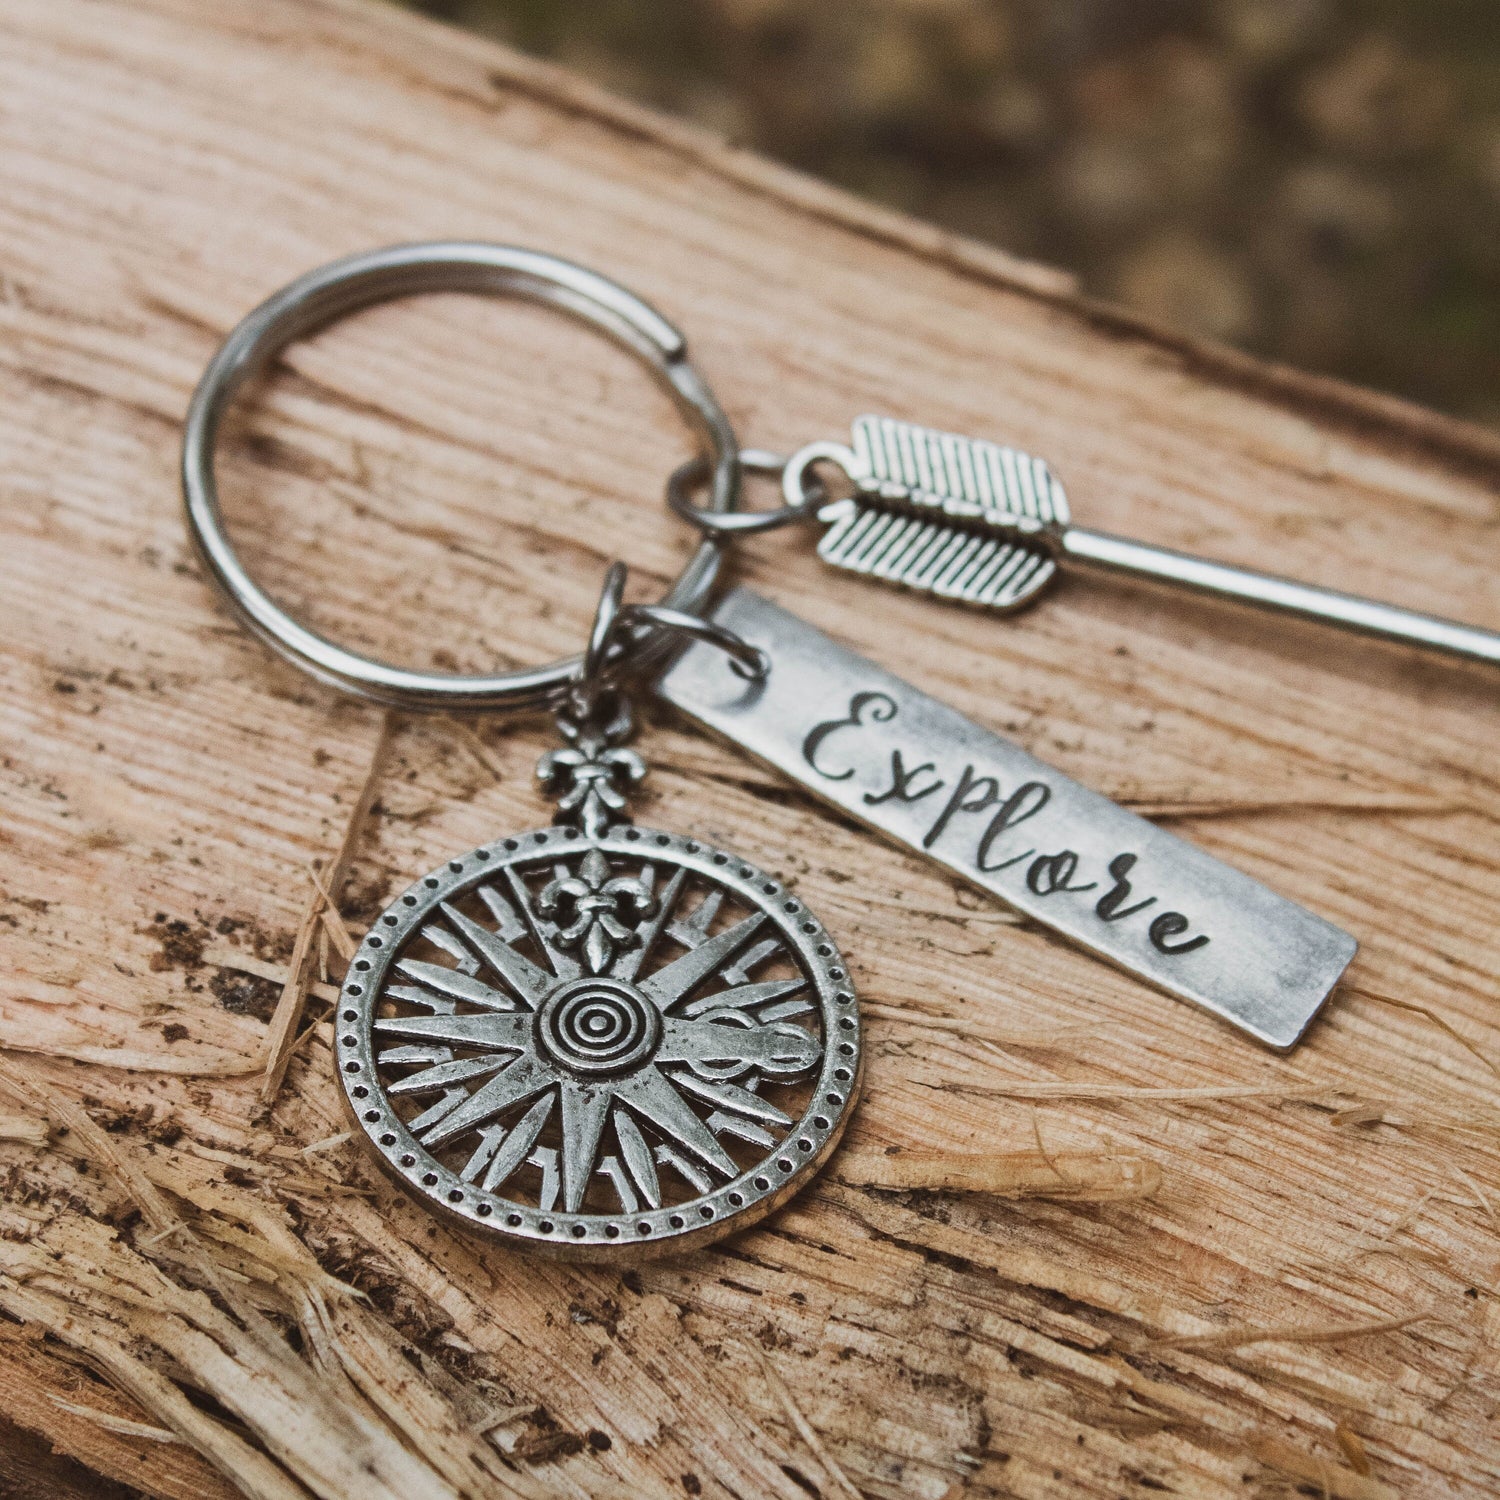 Explore Arrow Key Chain, Adventuring Keychain, Hiker Gift, Outdoorsy Gift, Gifts for Her, Gifts for Him, Happy Camper Keychain, Explore